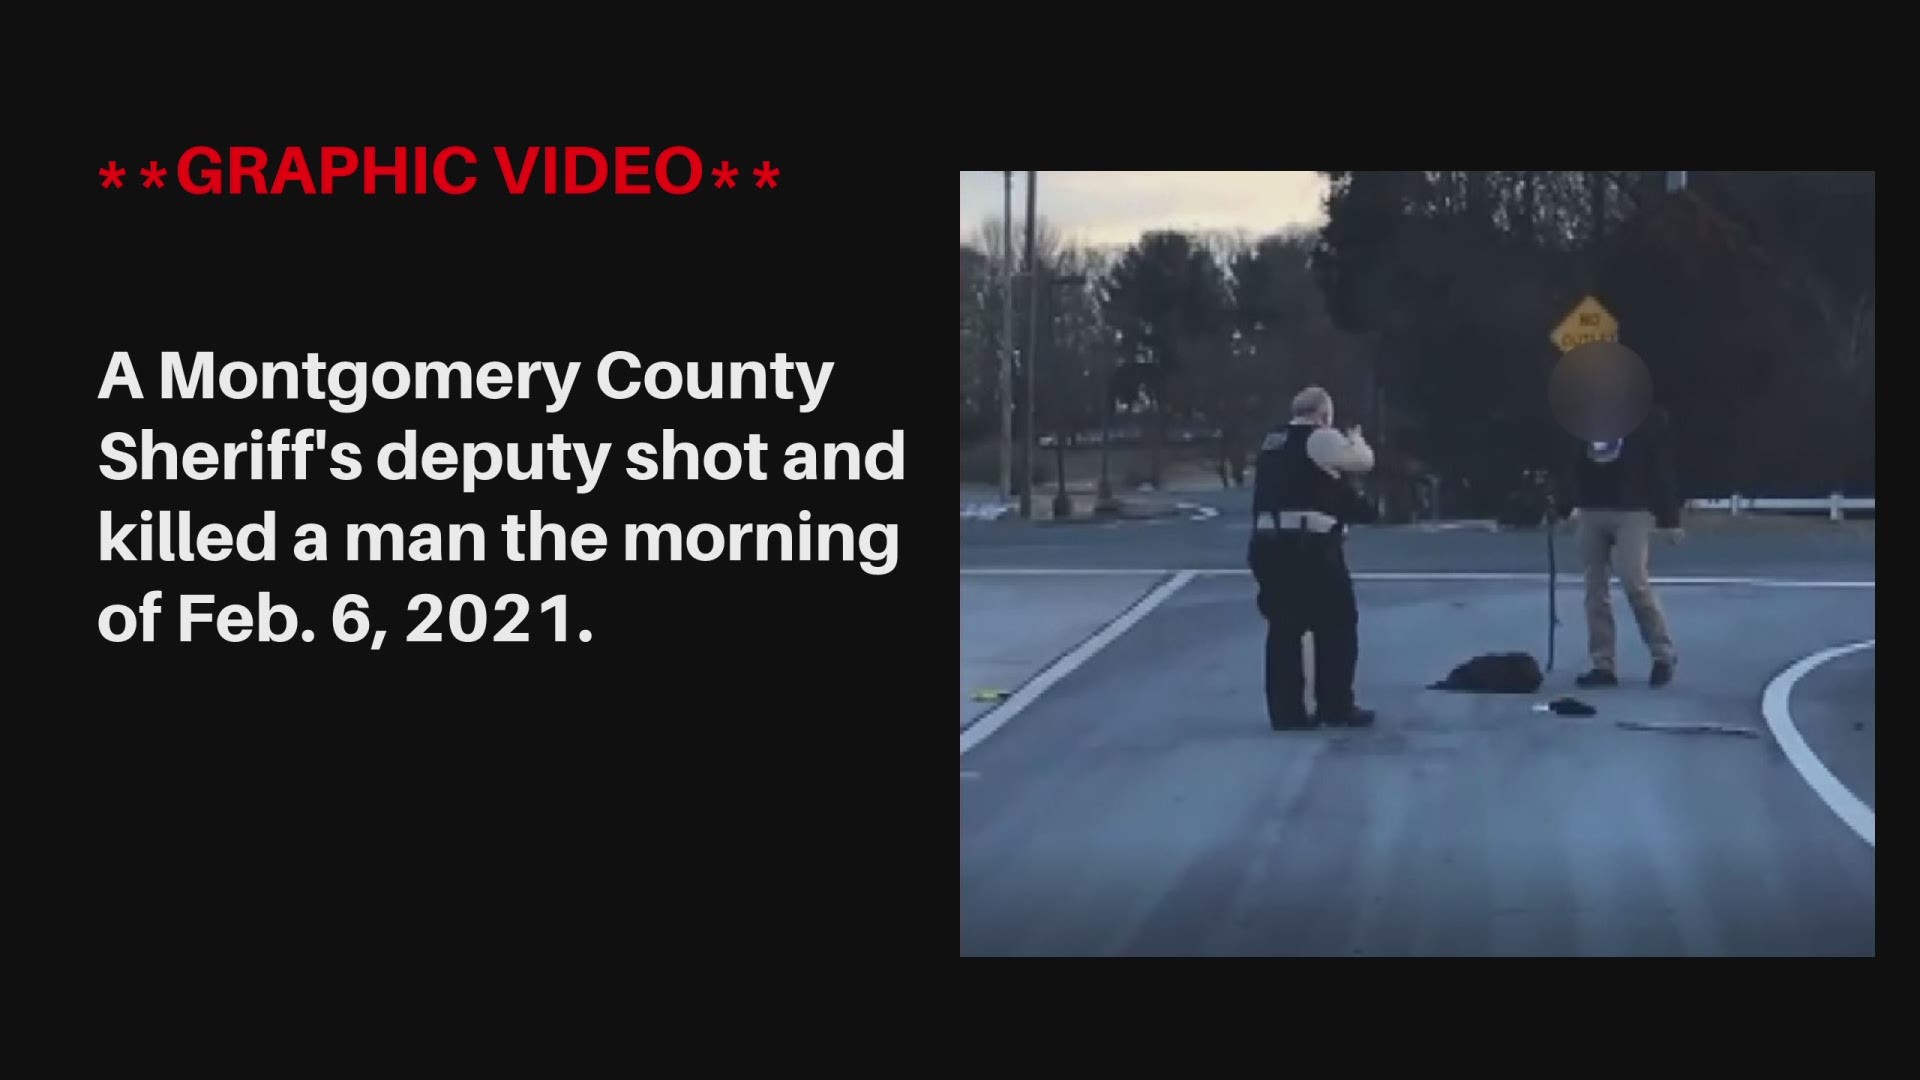 A roughly 25-second video, taken by a witness inside his car, shows what happened leading up to the fatal shooting of a 52-year-old man by a sheriff's deputy.